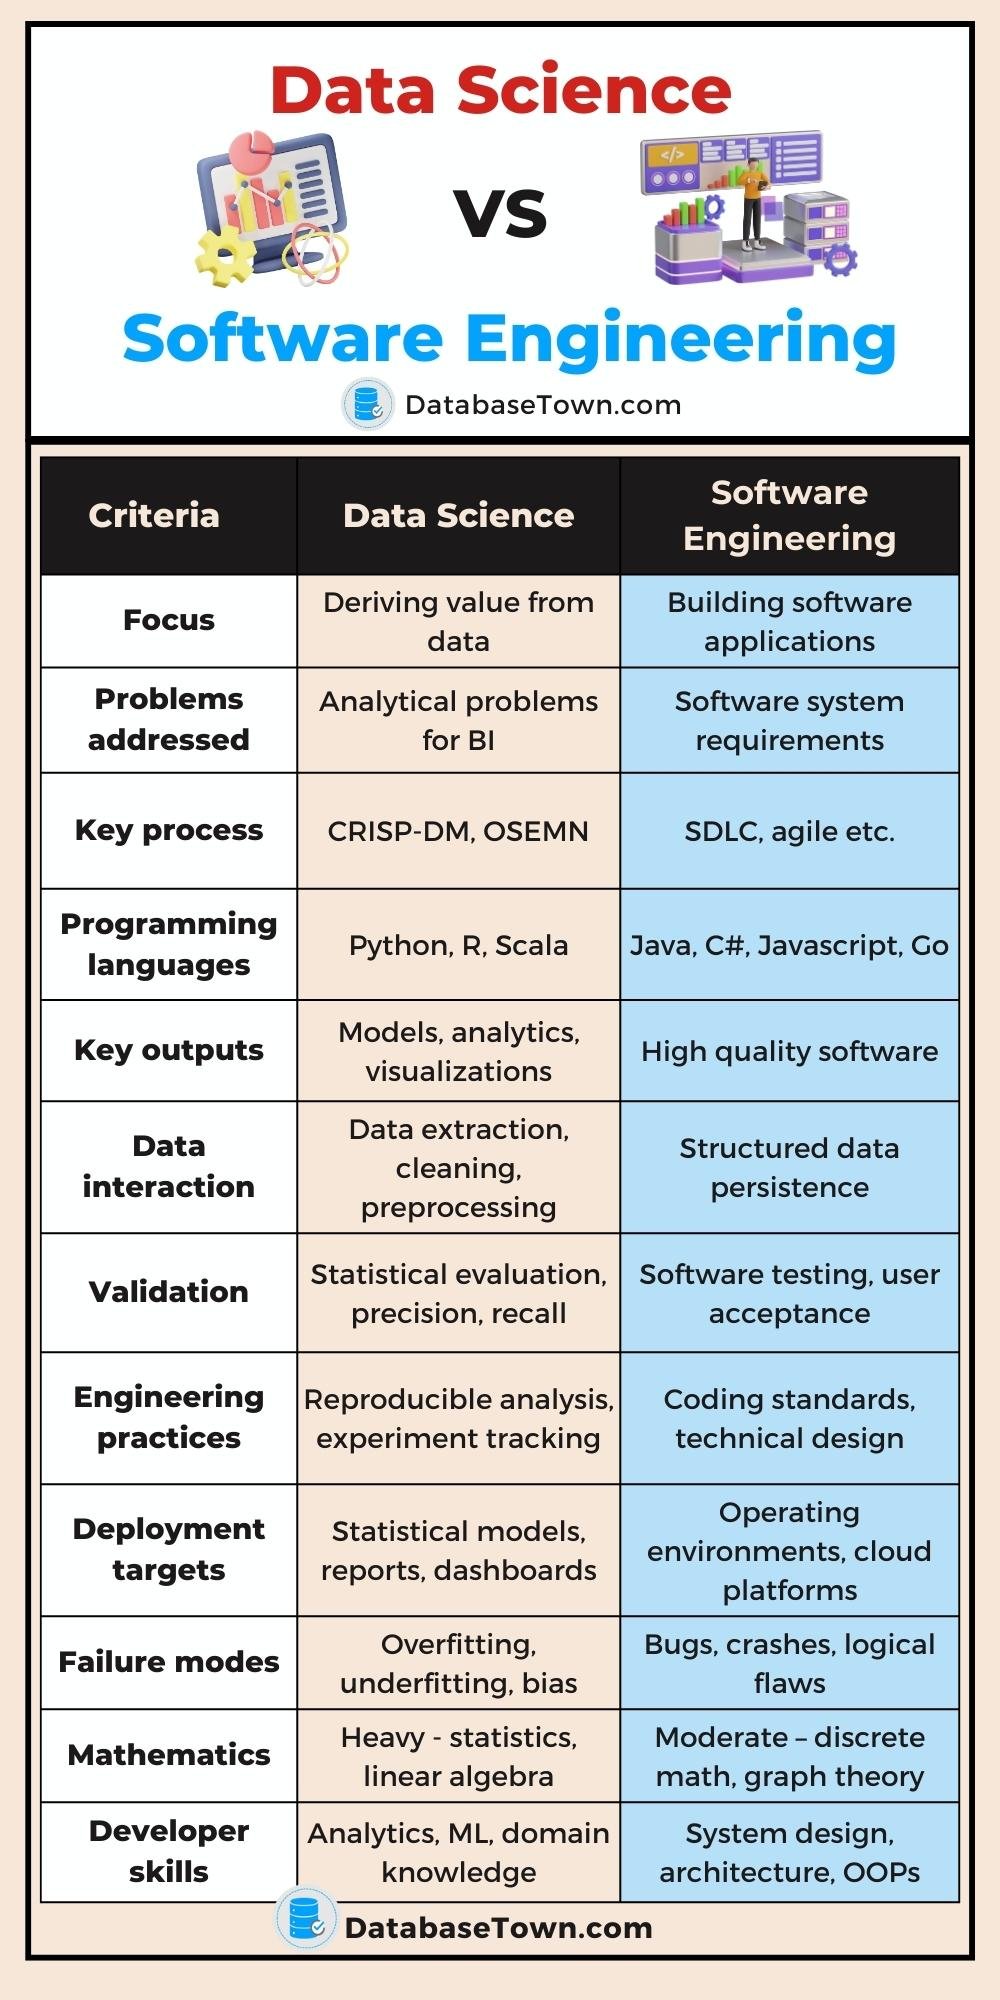 Difference Between Data Science VS Software Engineering